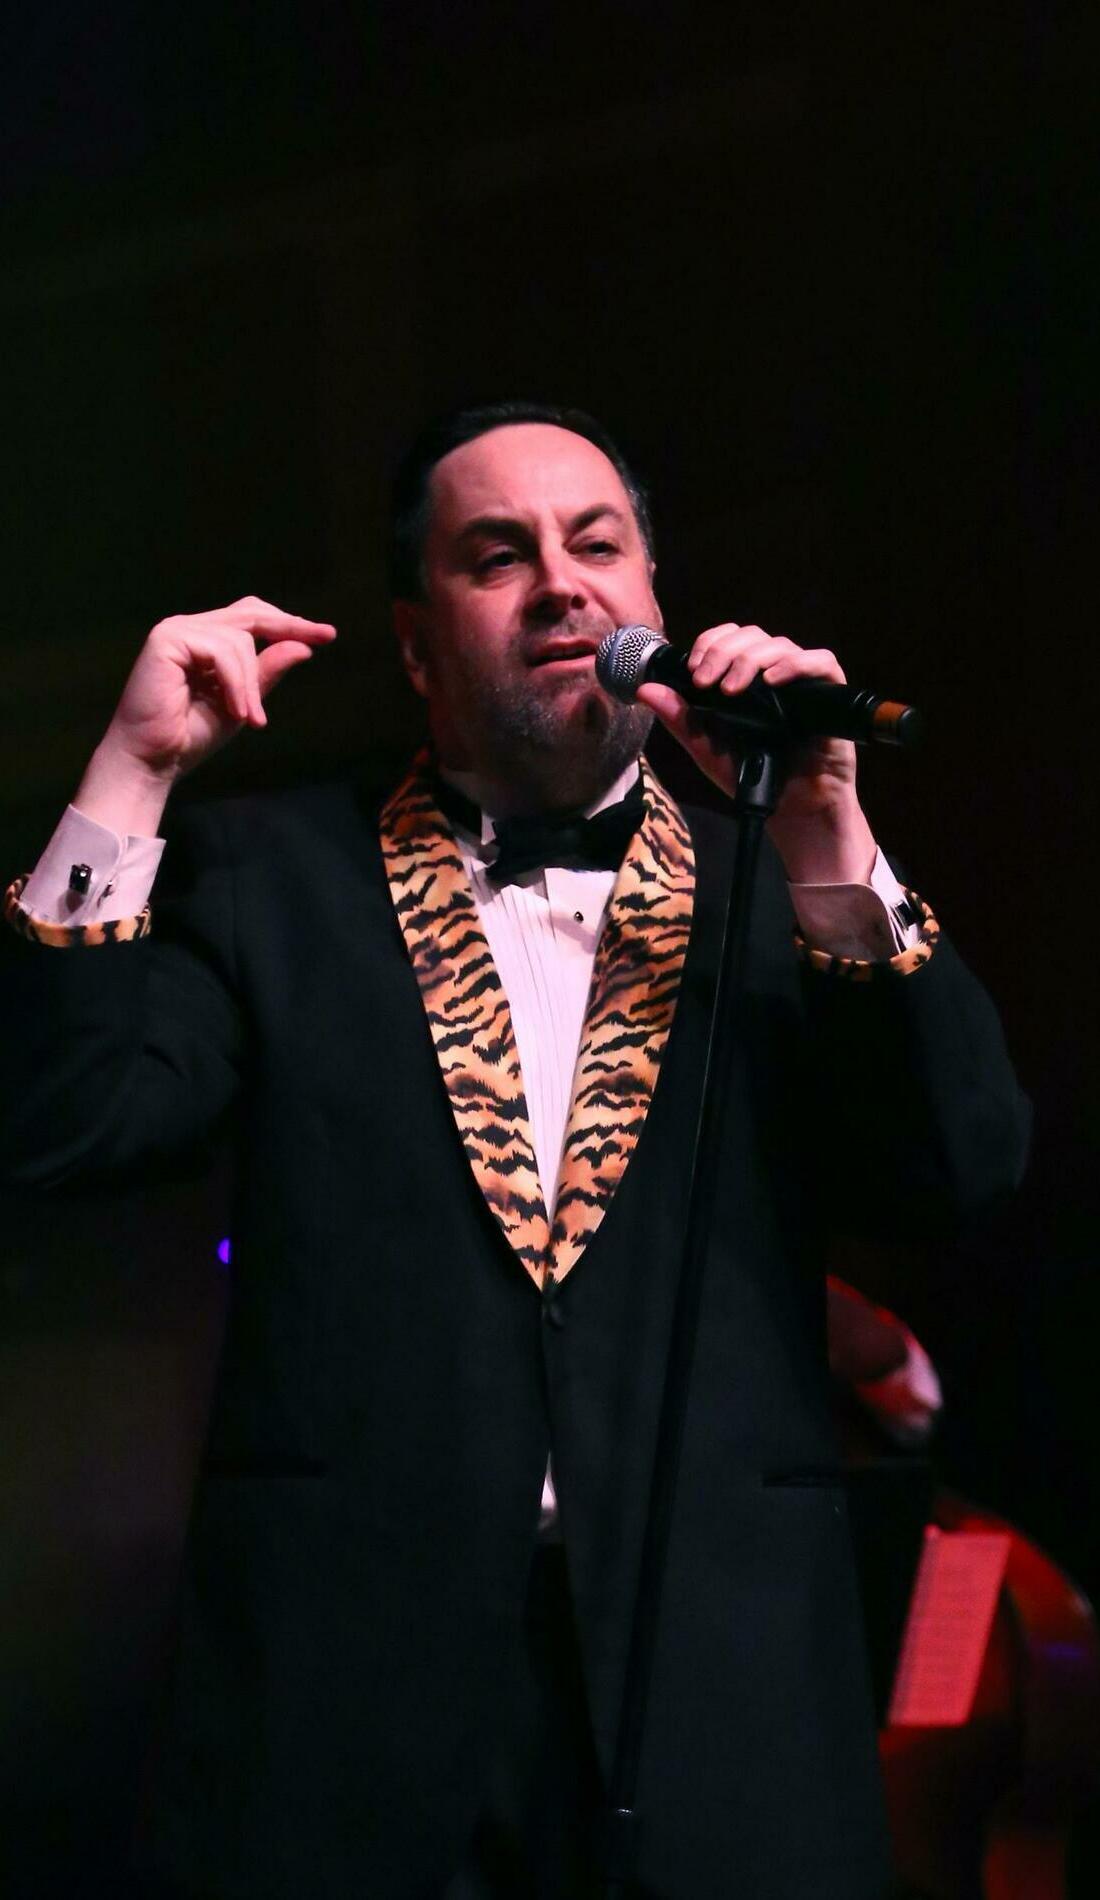 A Richard Cheese live event